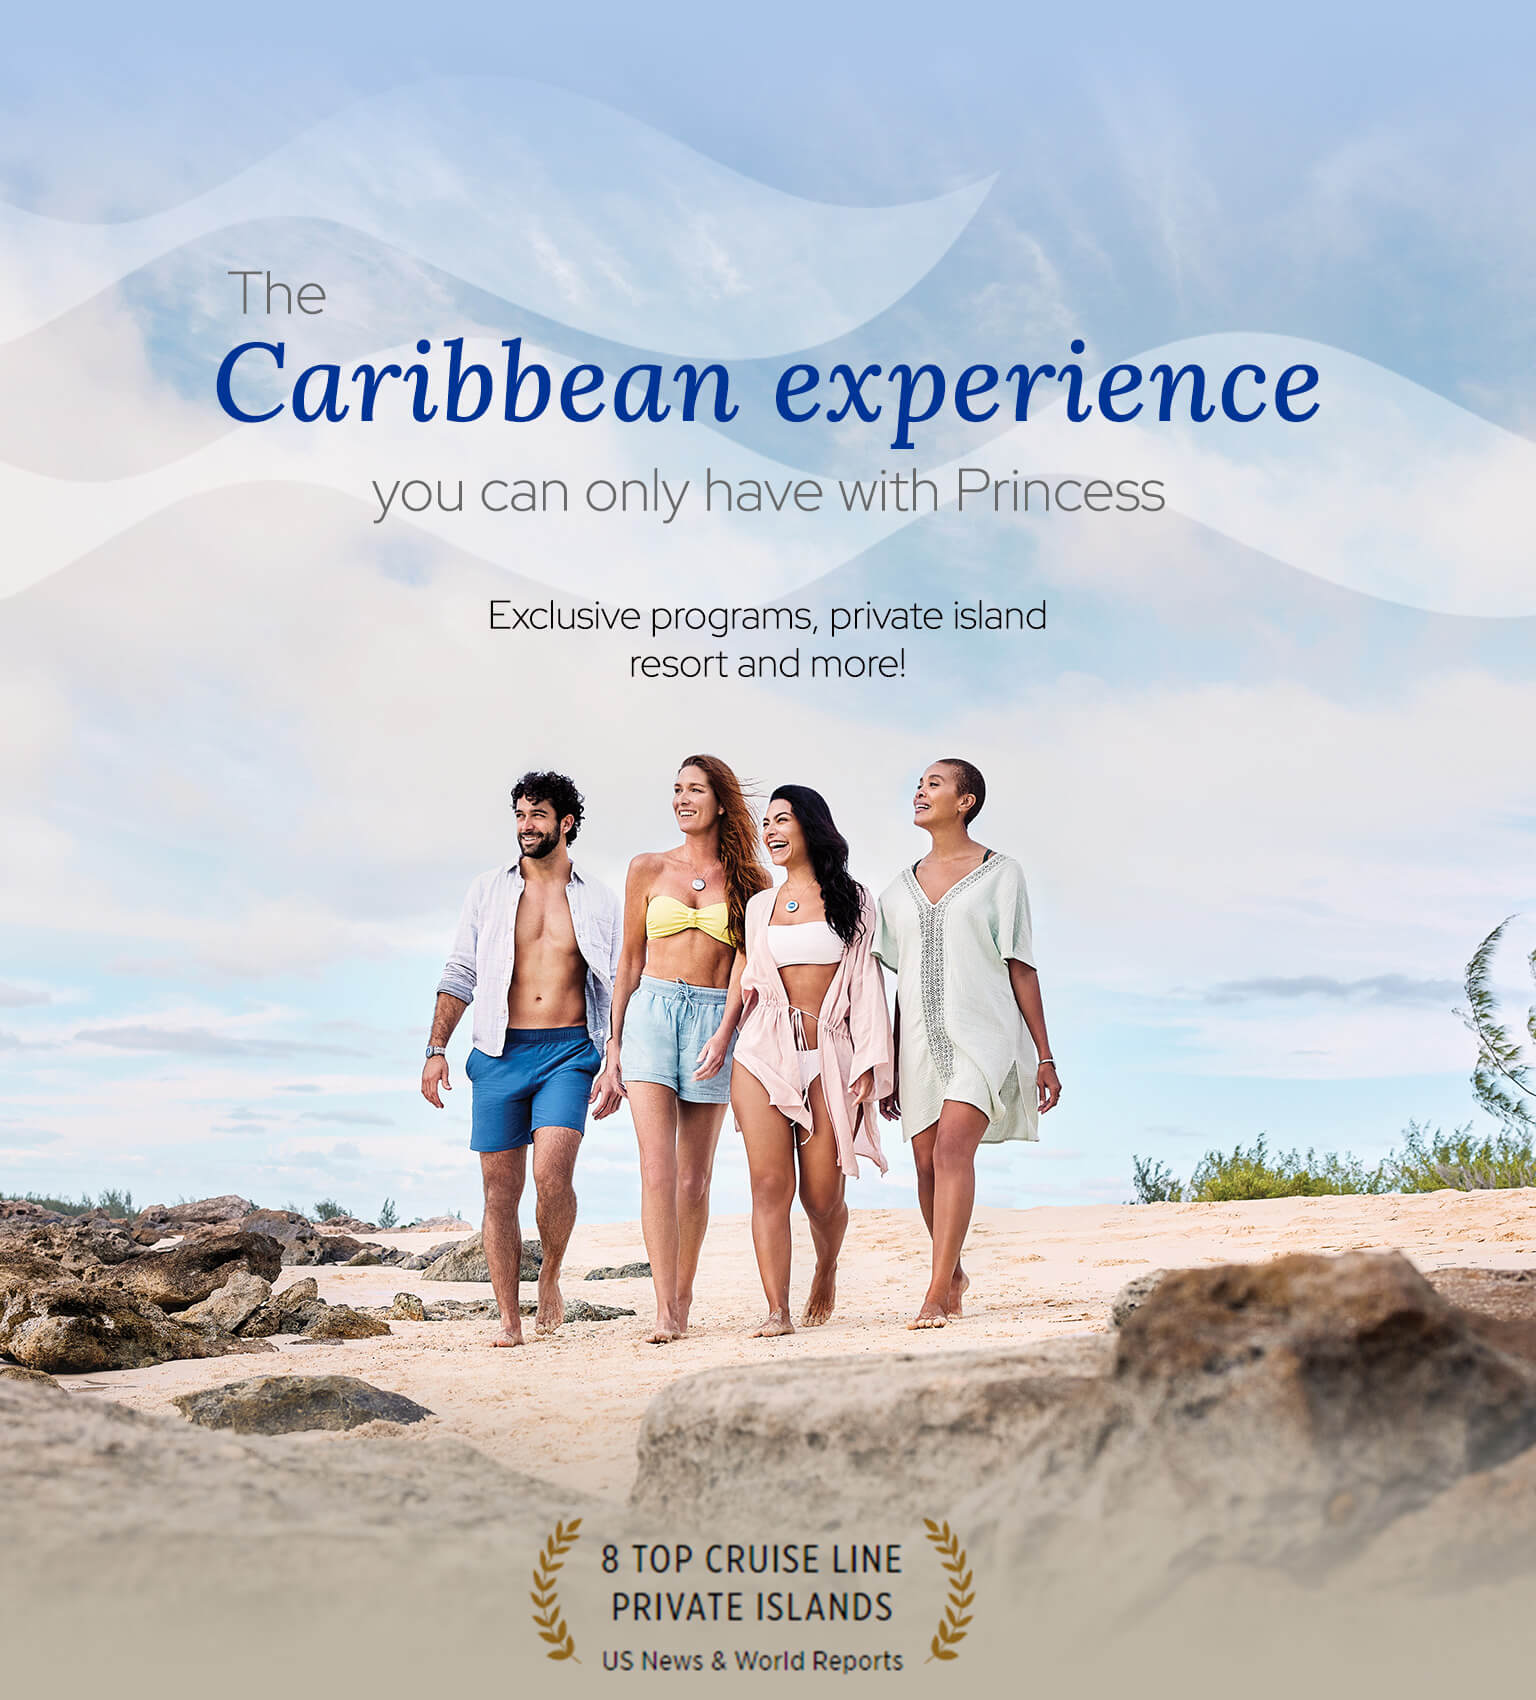 Friends at beach. The Caribbean experience you can only have with Princess. Exclusive programs, private island resort and more! 8 Top Cruise Line Private Island US News & World reports logo.